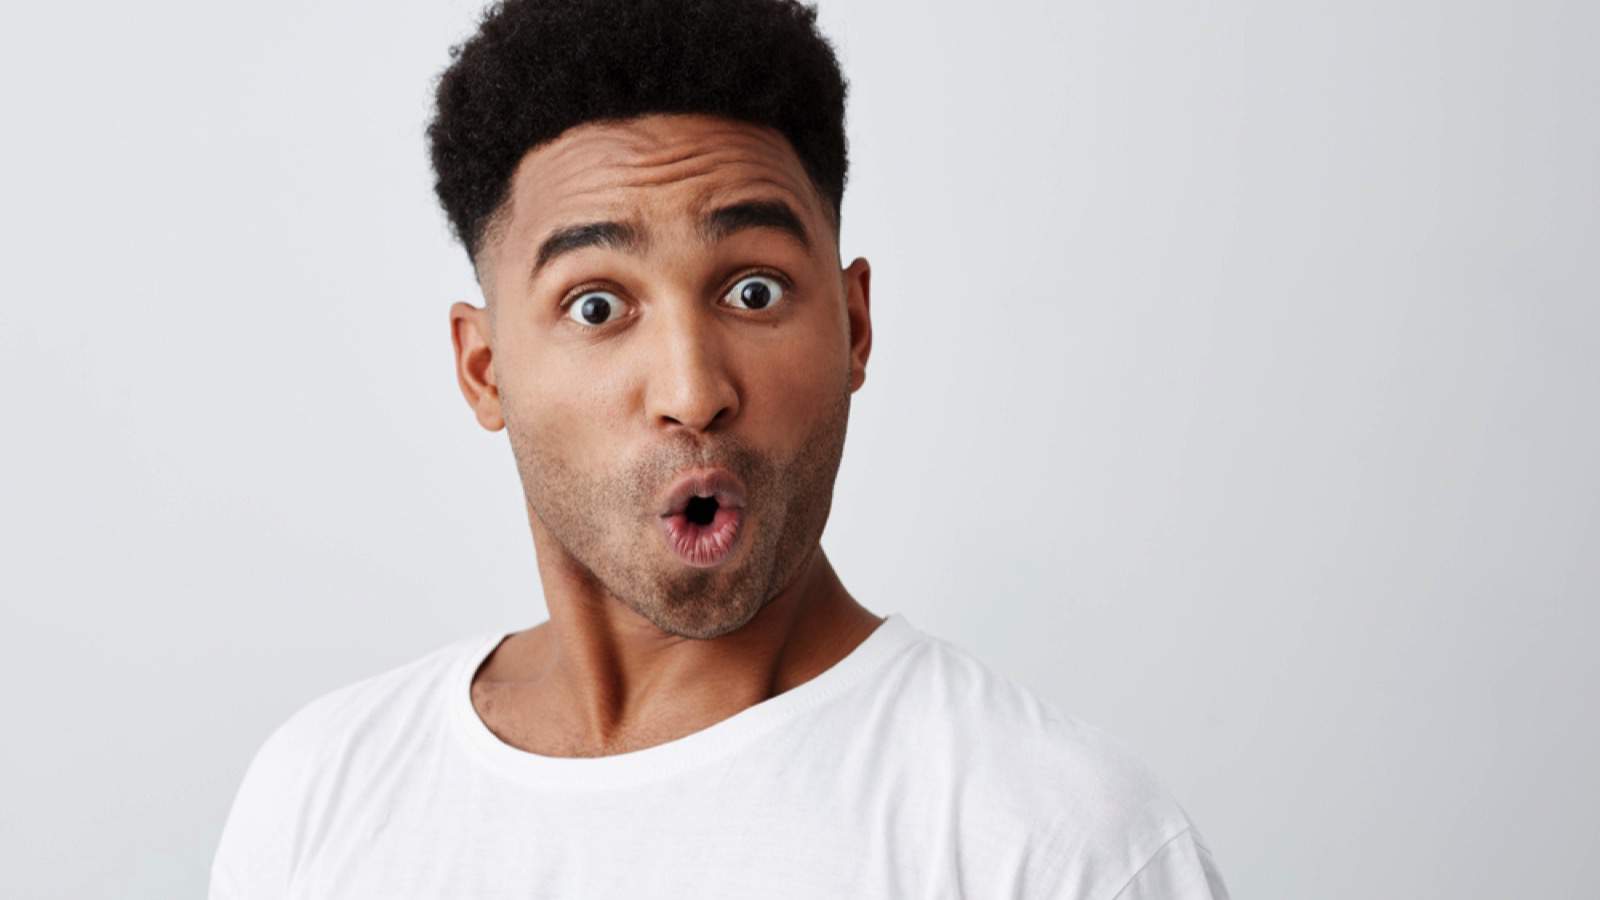 Funny man with surprised face